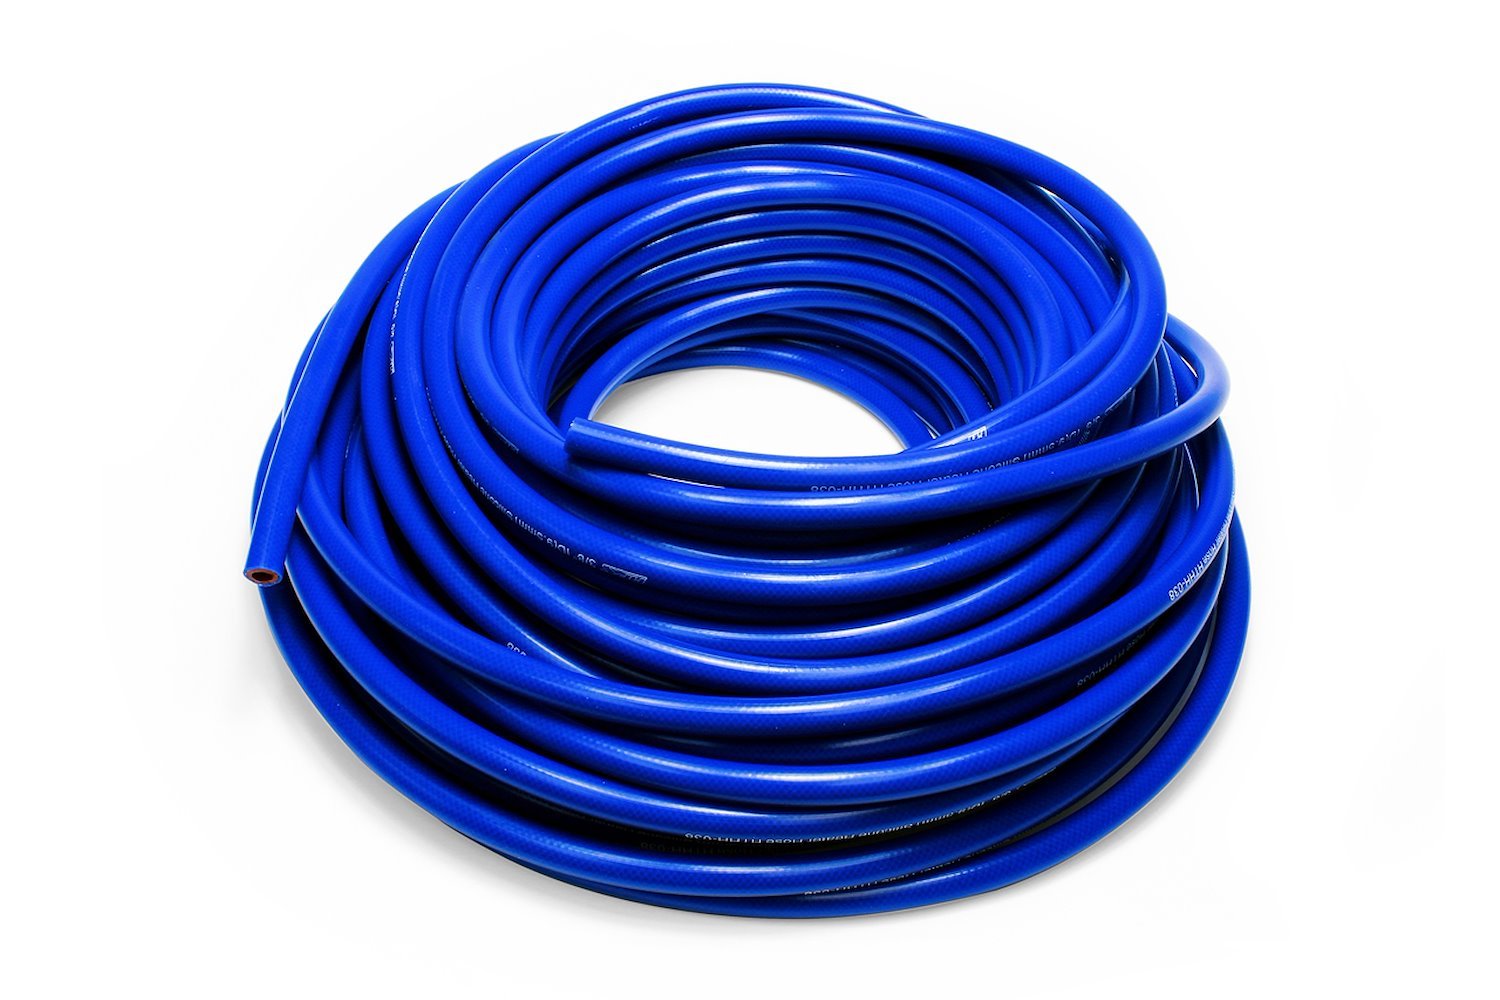 HTHH-025-BLUEx50 Silicone Heater Hose Tubing, High-Temp 1-Ply Reinforced, 1/4 in. ID, 50 ft. Roll, Blue